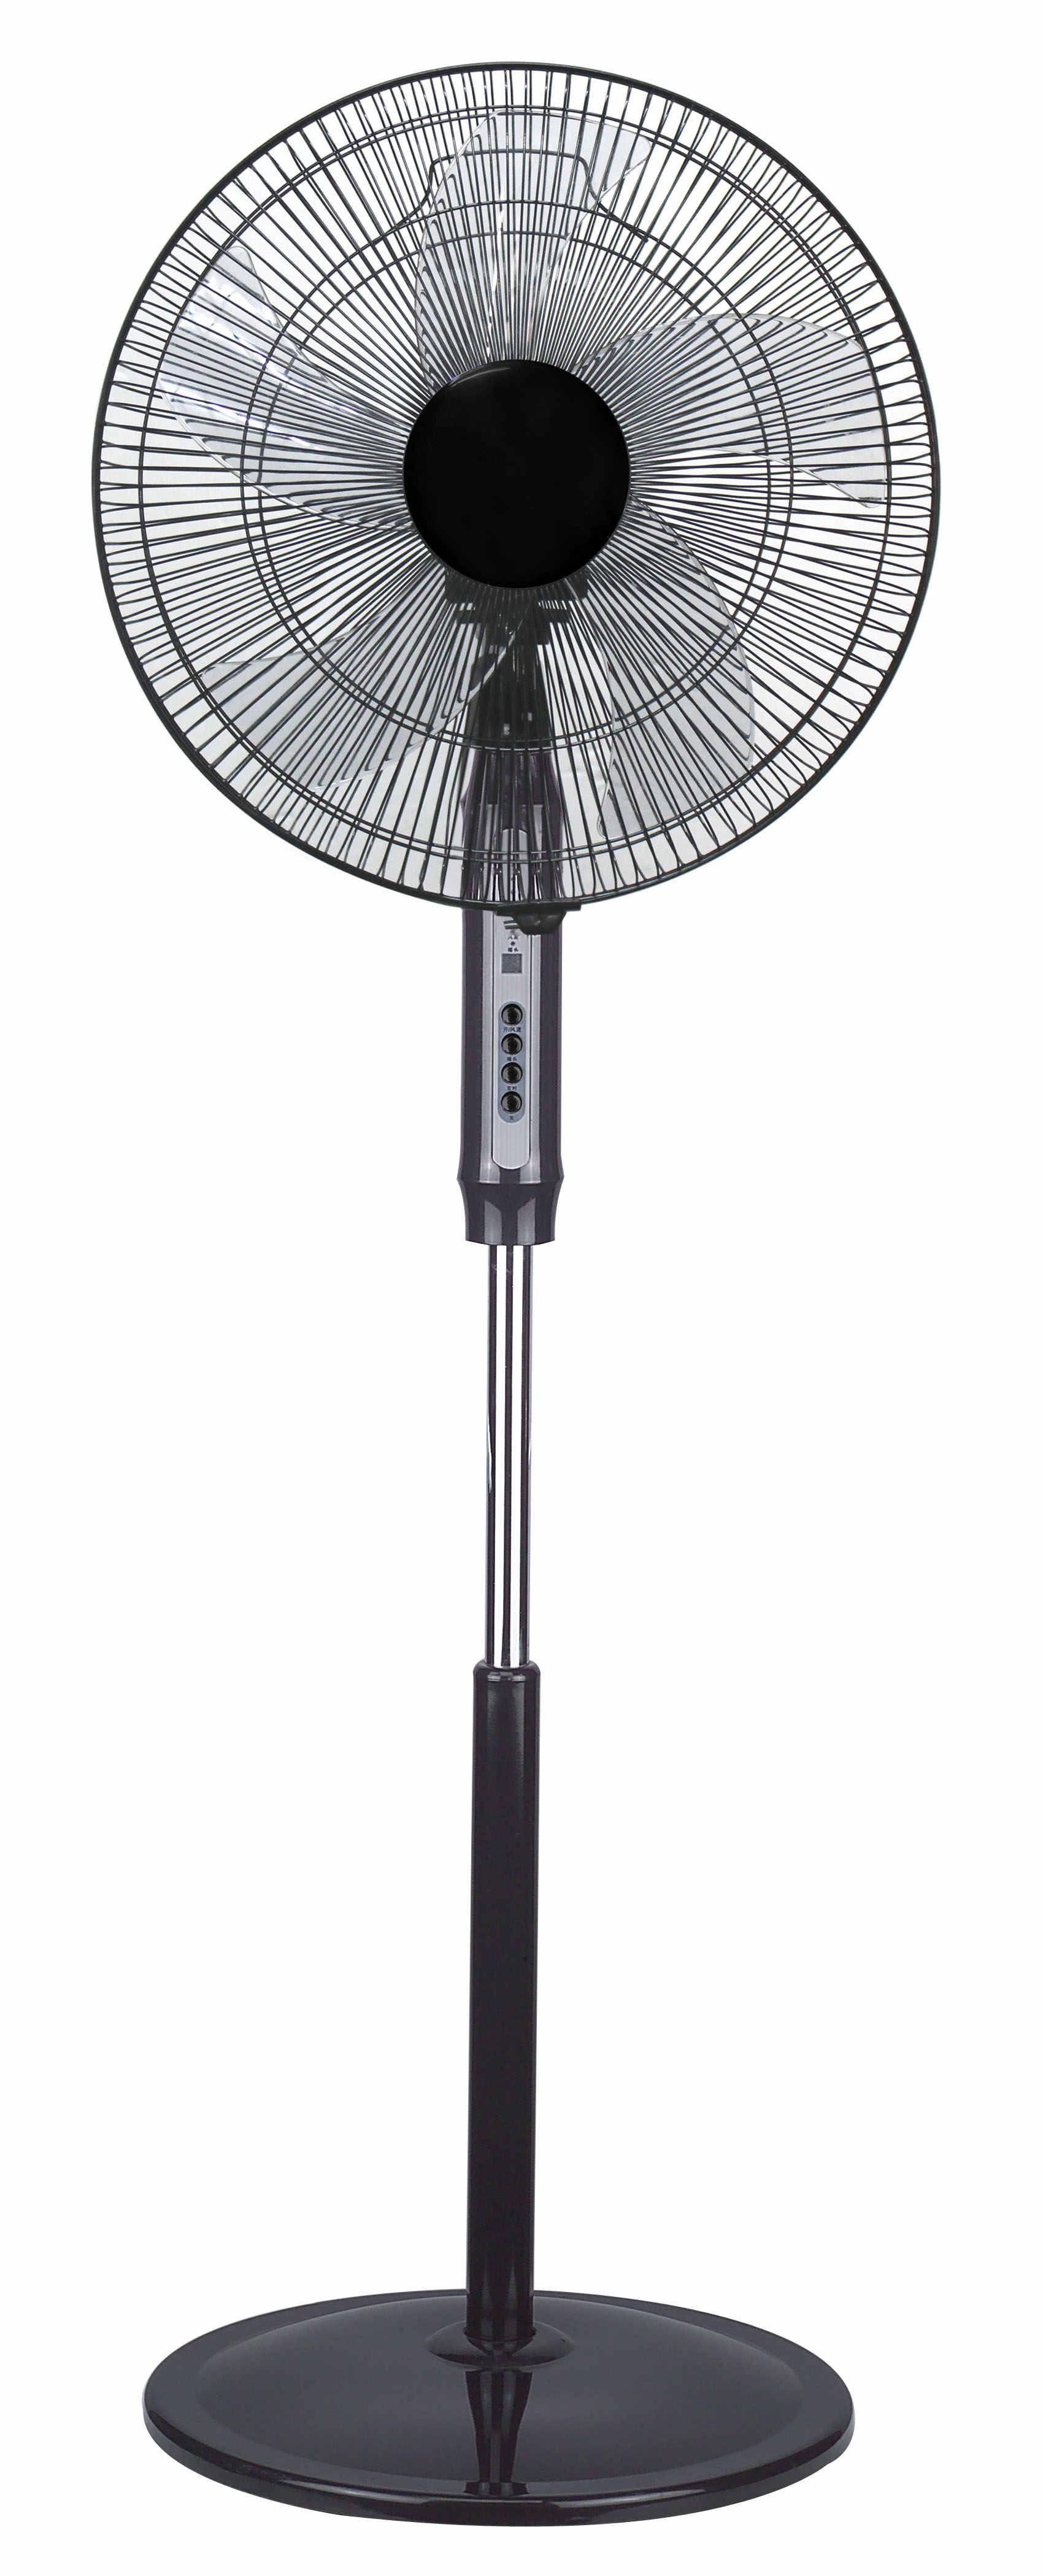 40cm 1350RPM High Speed Stand Fan with 3 AS Blades